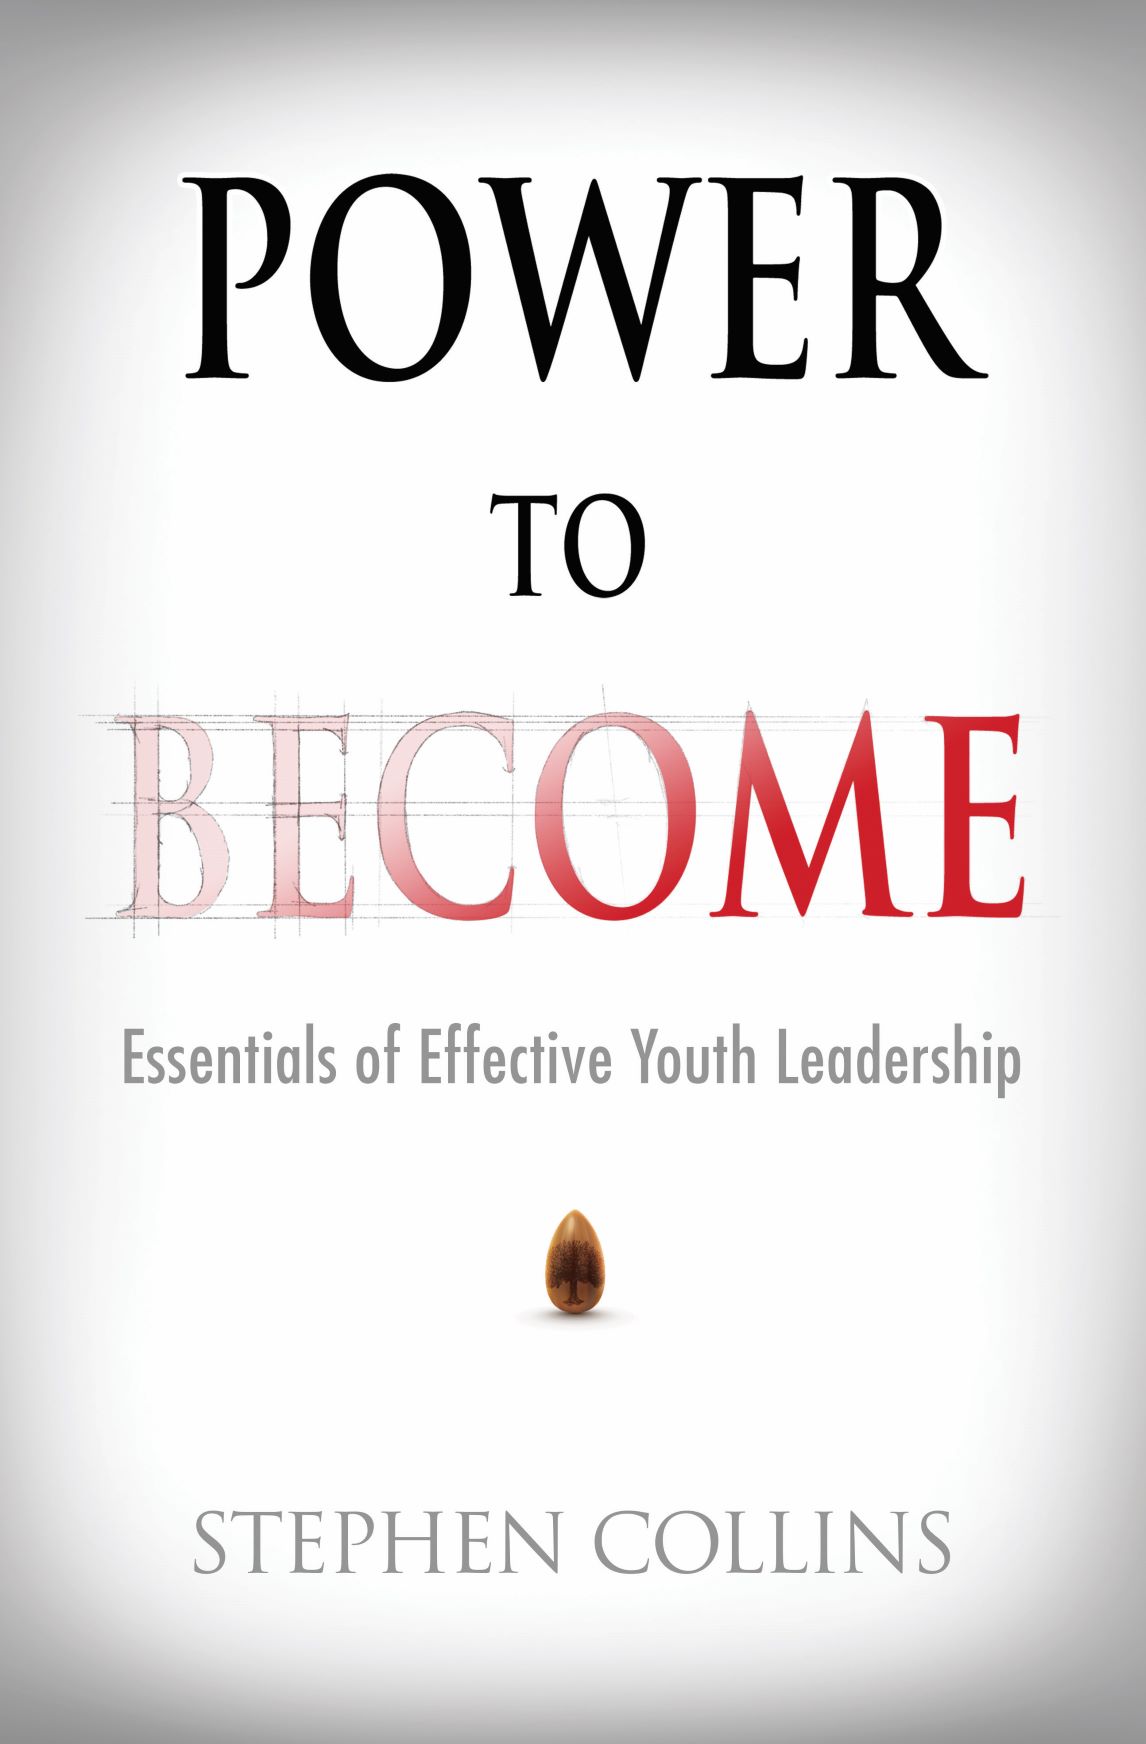 Power to Become - Stephen Collins